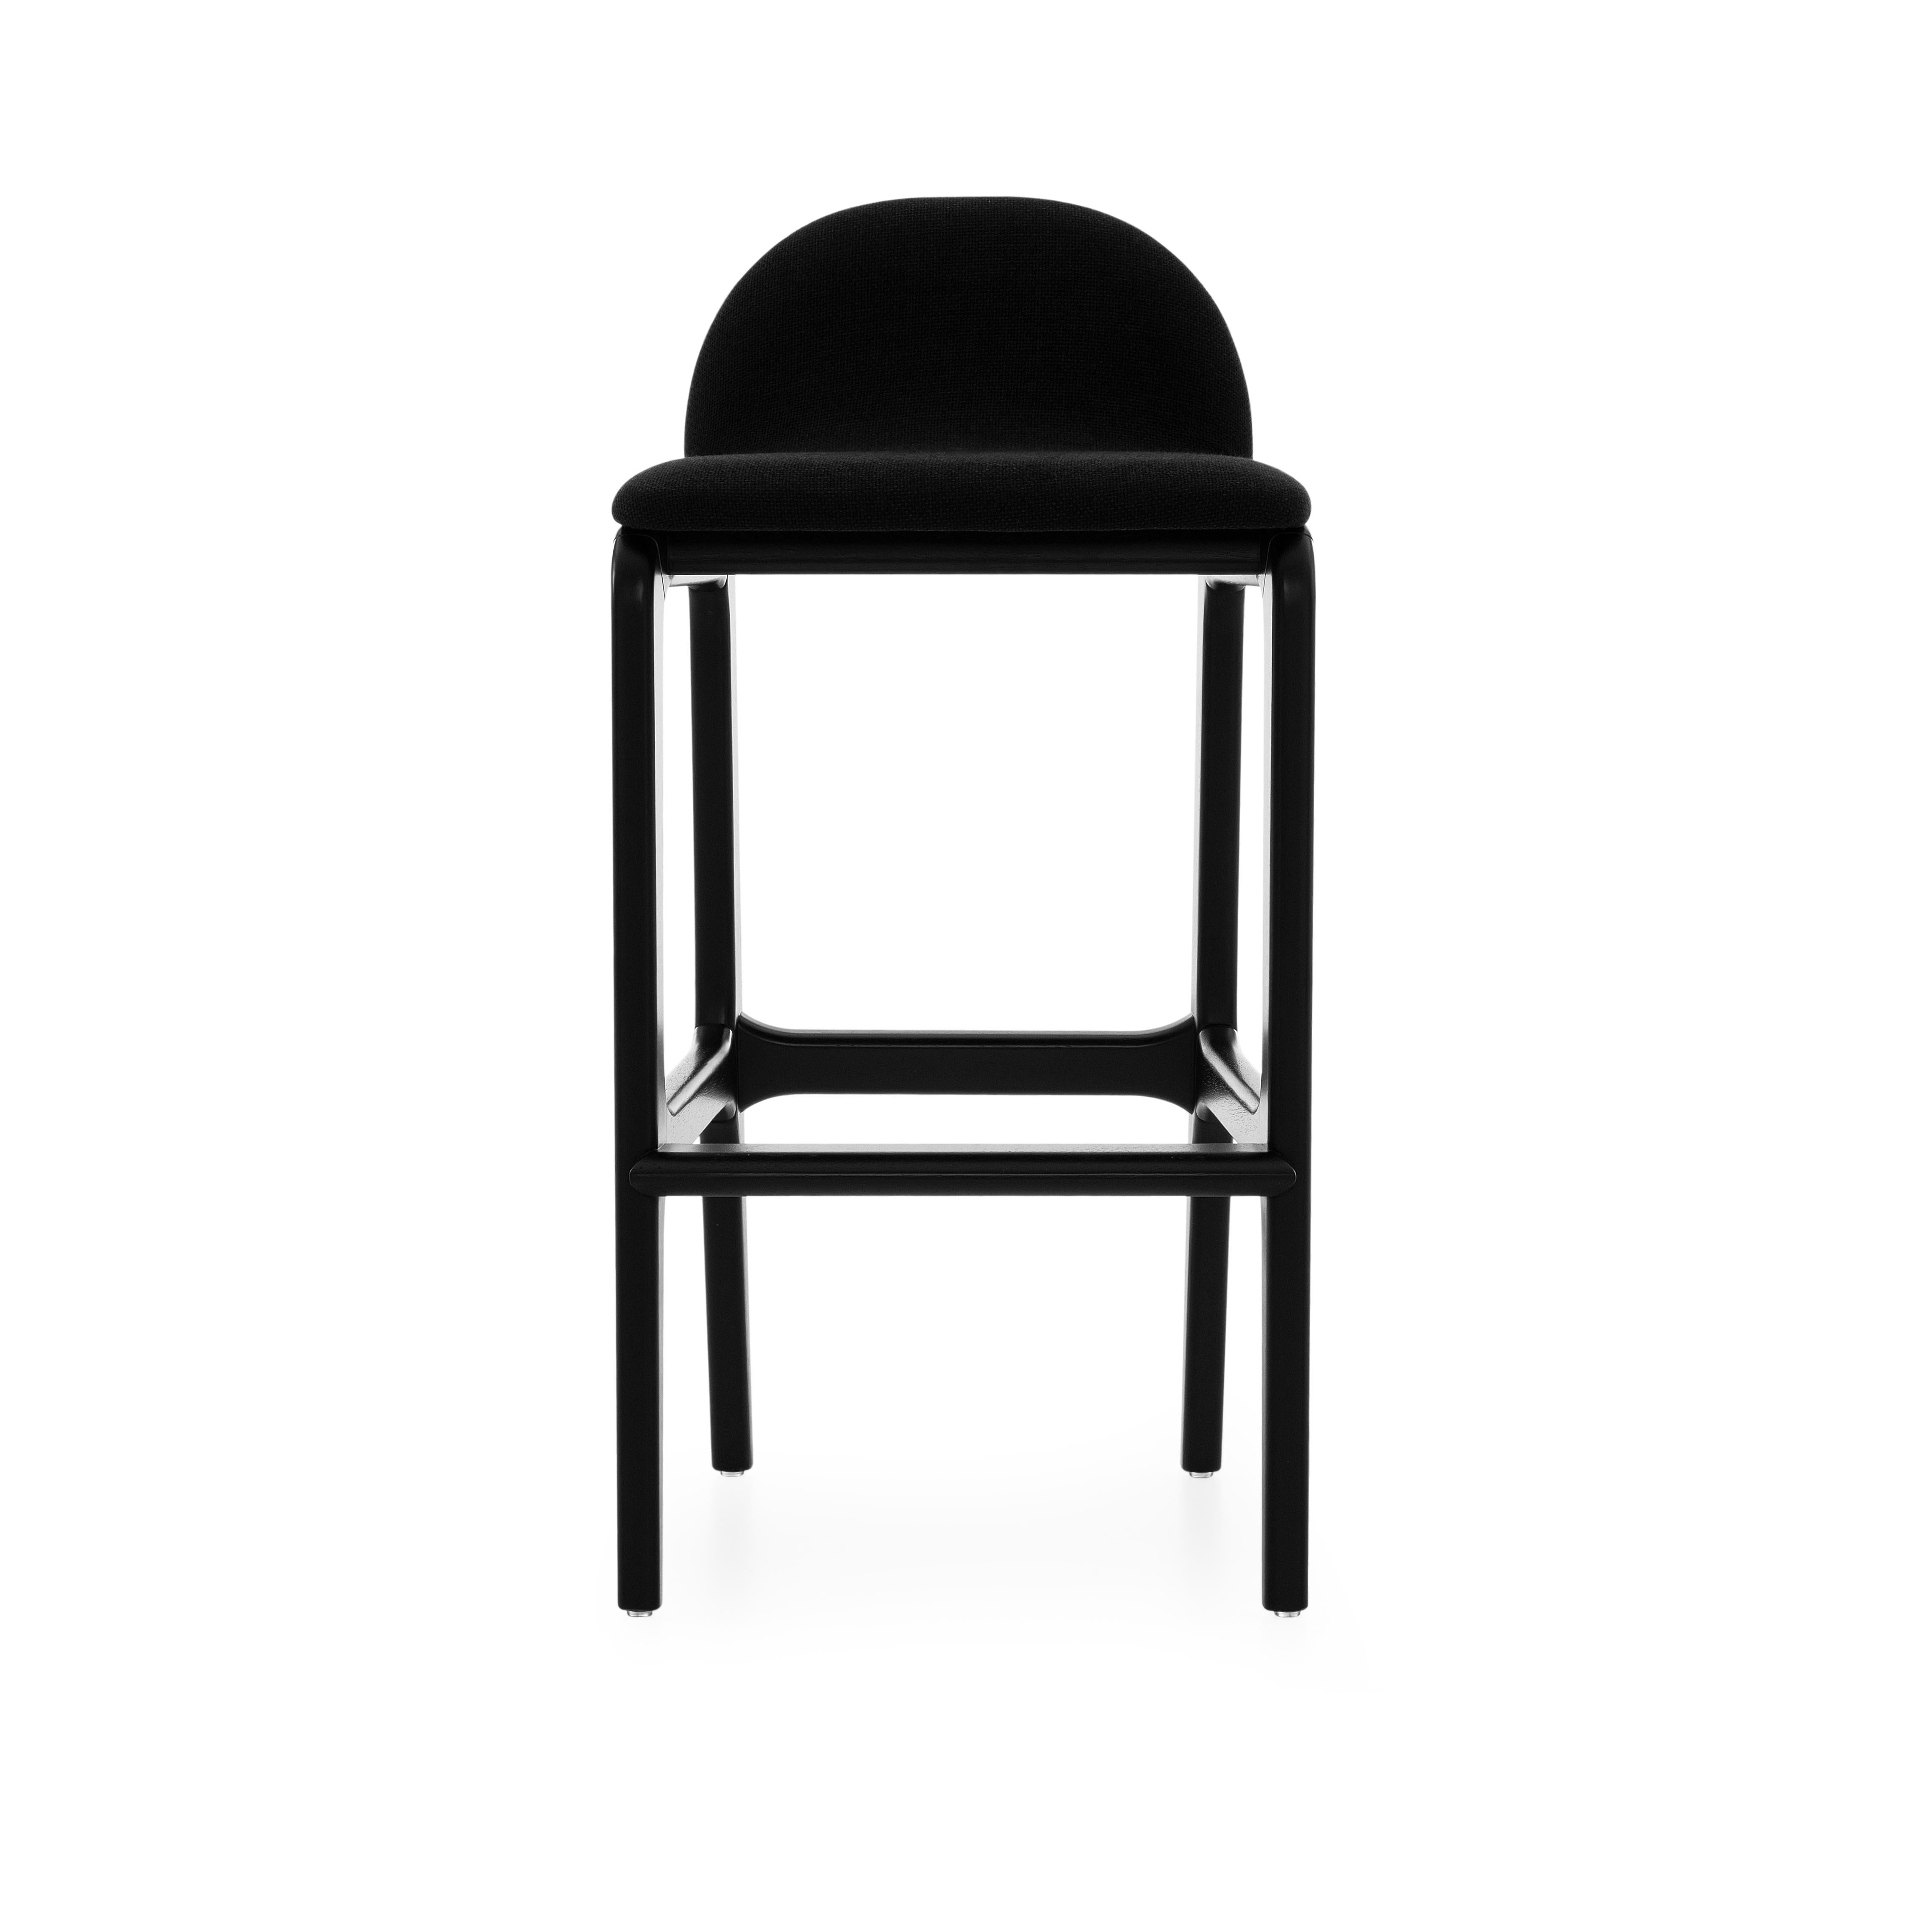 Ura Counter Stool in Black Wood Finish Base and Upholstered Black Seat In New Condition For Sale In Miami, FL